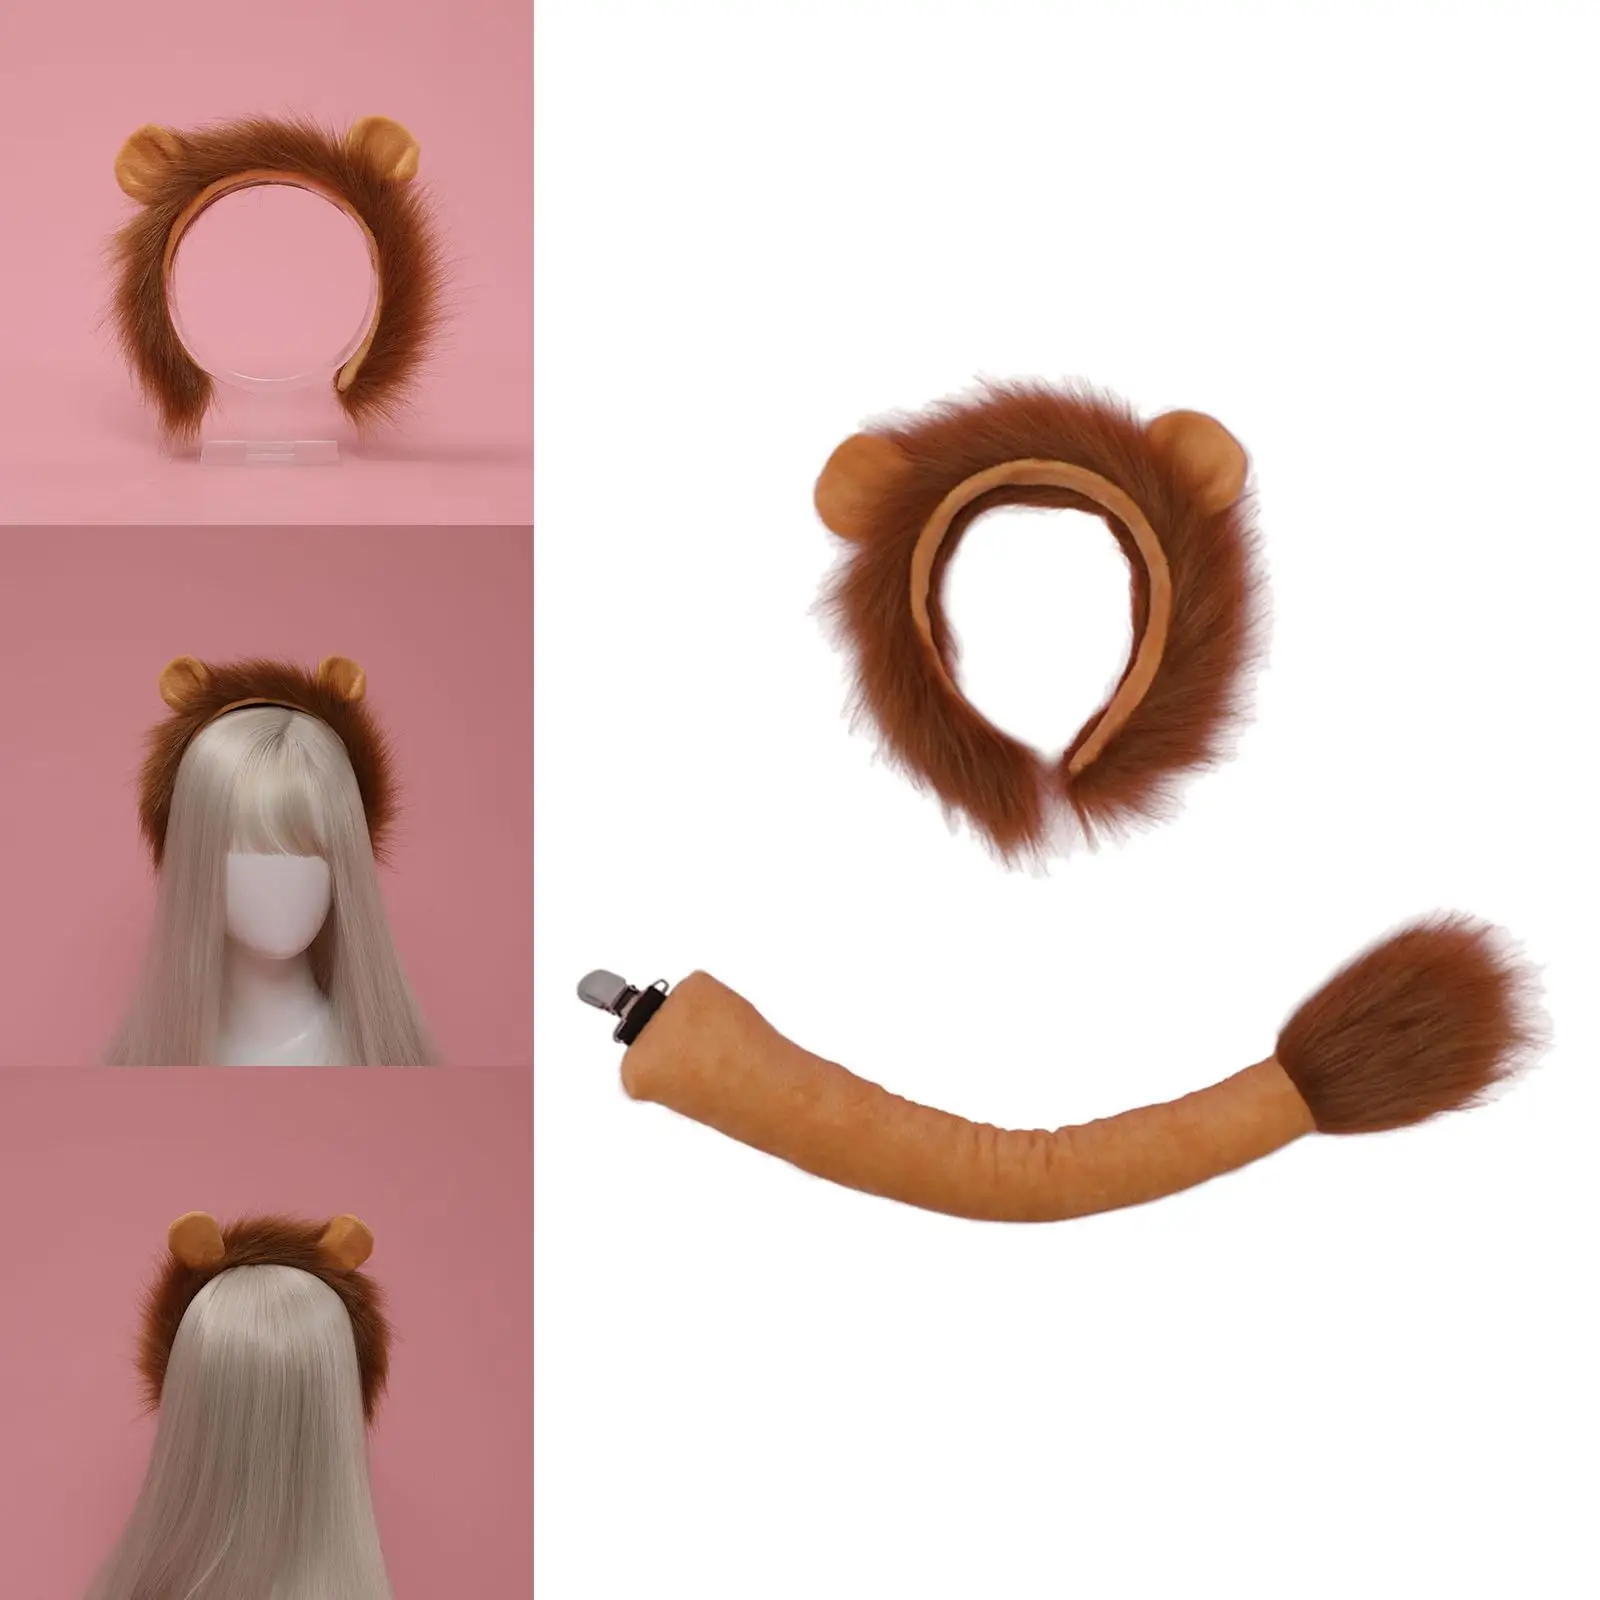 Lion Tail Ears Set Plush Fancy Dress Jungle Animal Ears Costume Headwear Cosplay for Adult Show Halloween Carnival Party